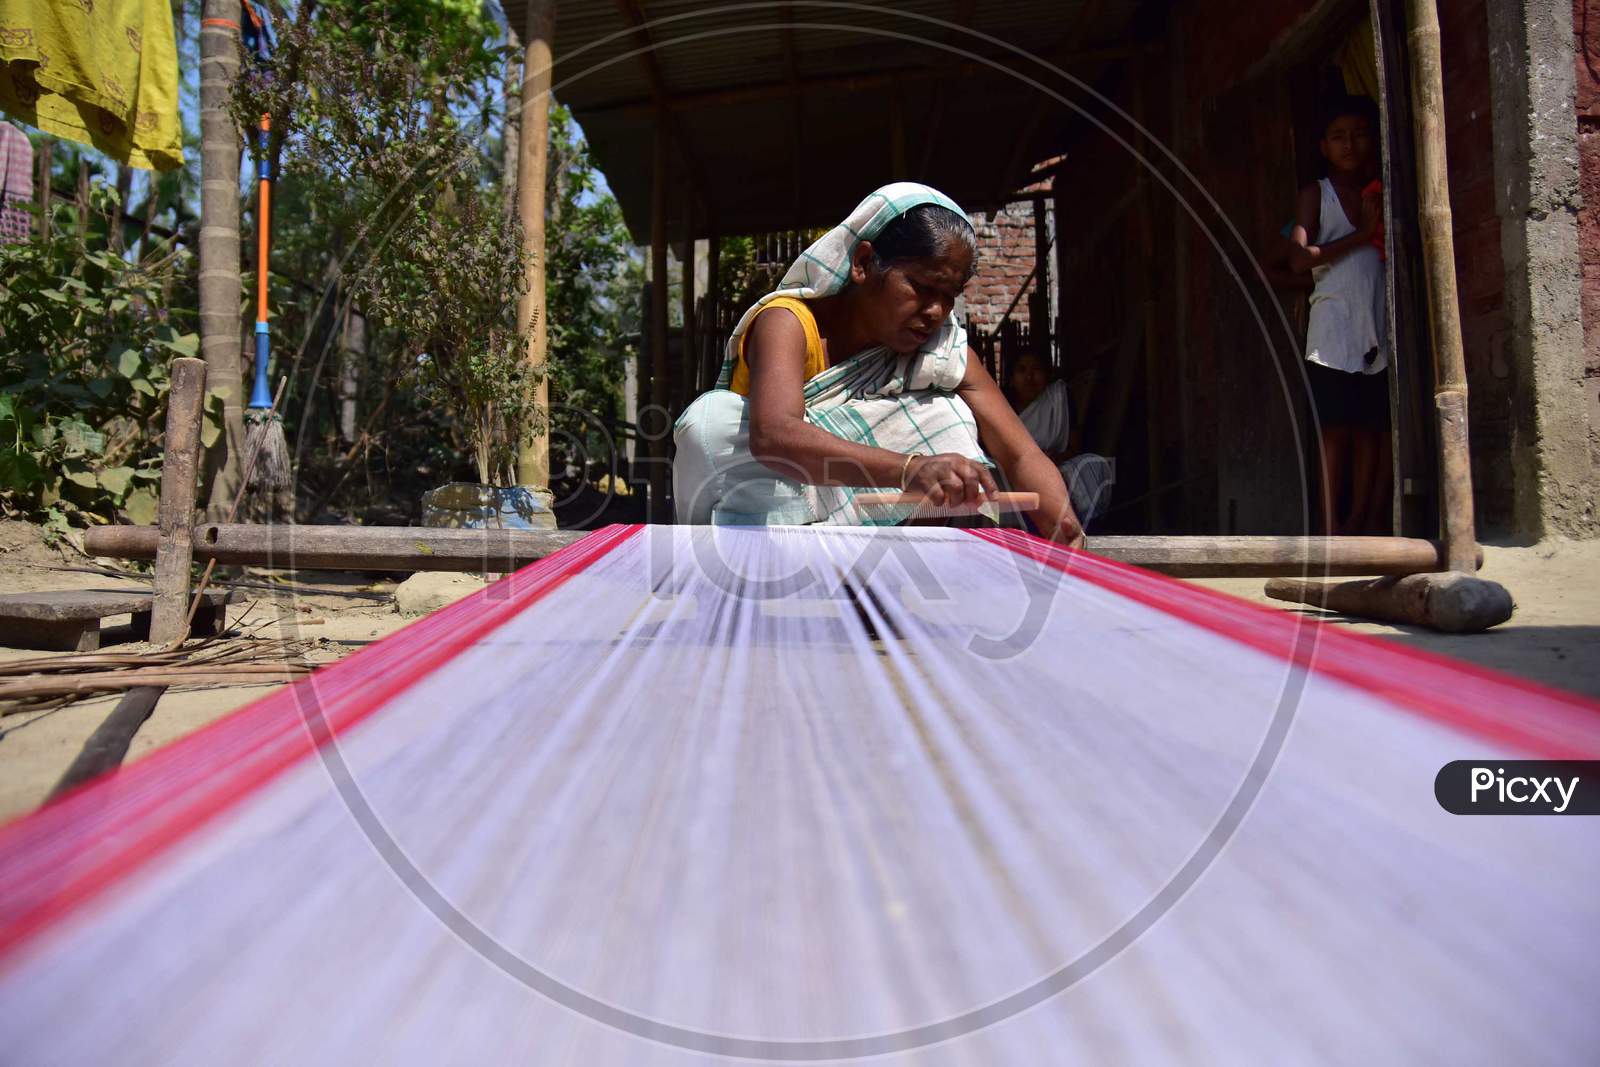 Women Busy In Weaving Traditional Assamese Gamosa Ahead Of Rongali Bihu Festival  During The Nationwide Lockdown Imposed In Wake Of Coronavirus Pandemic, In Nagaon District Of Assam On April 02,2020.